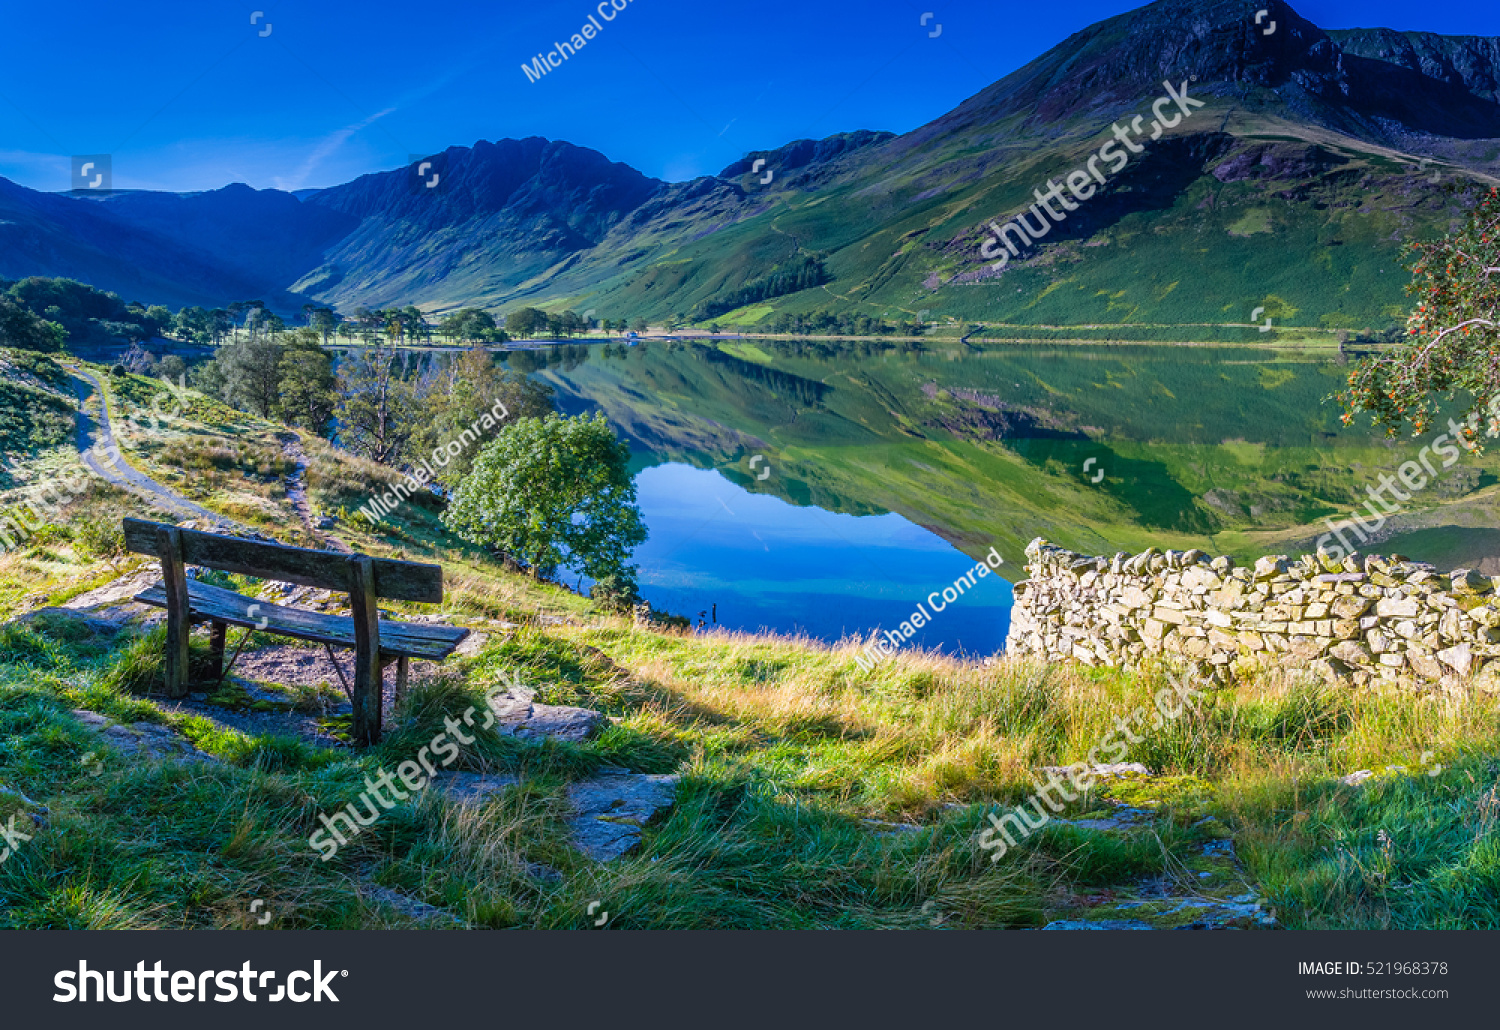 Rest for a moment at Buttermere, The Lake District, Cumbria, England #521968378